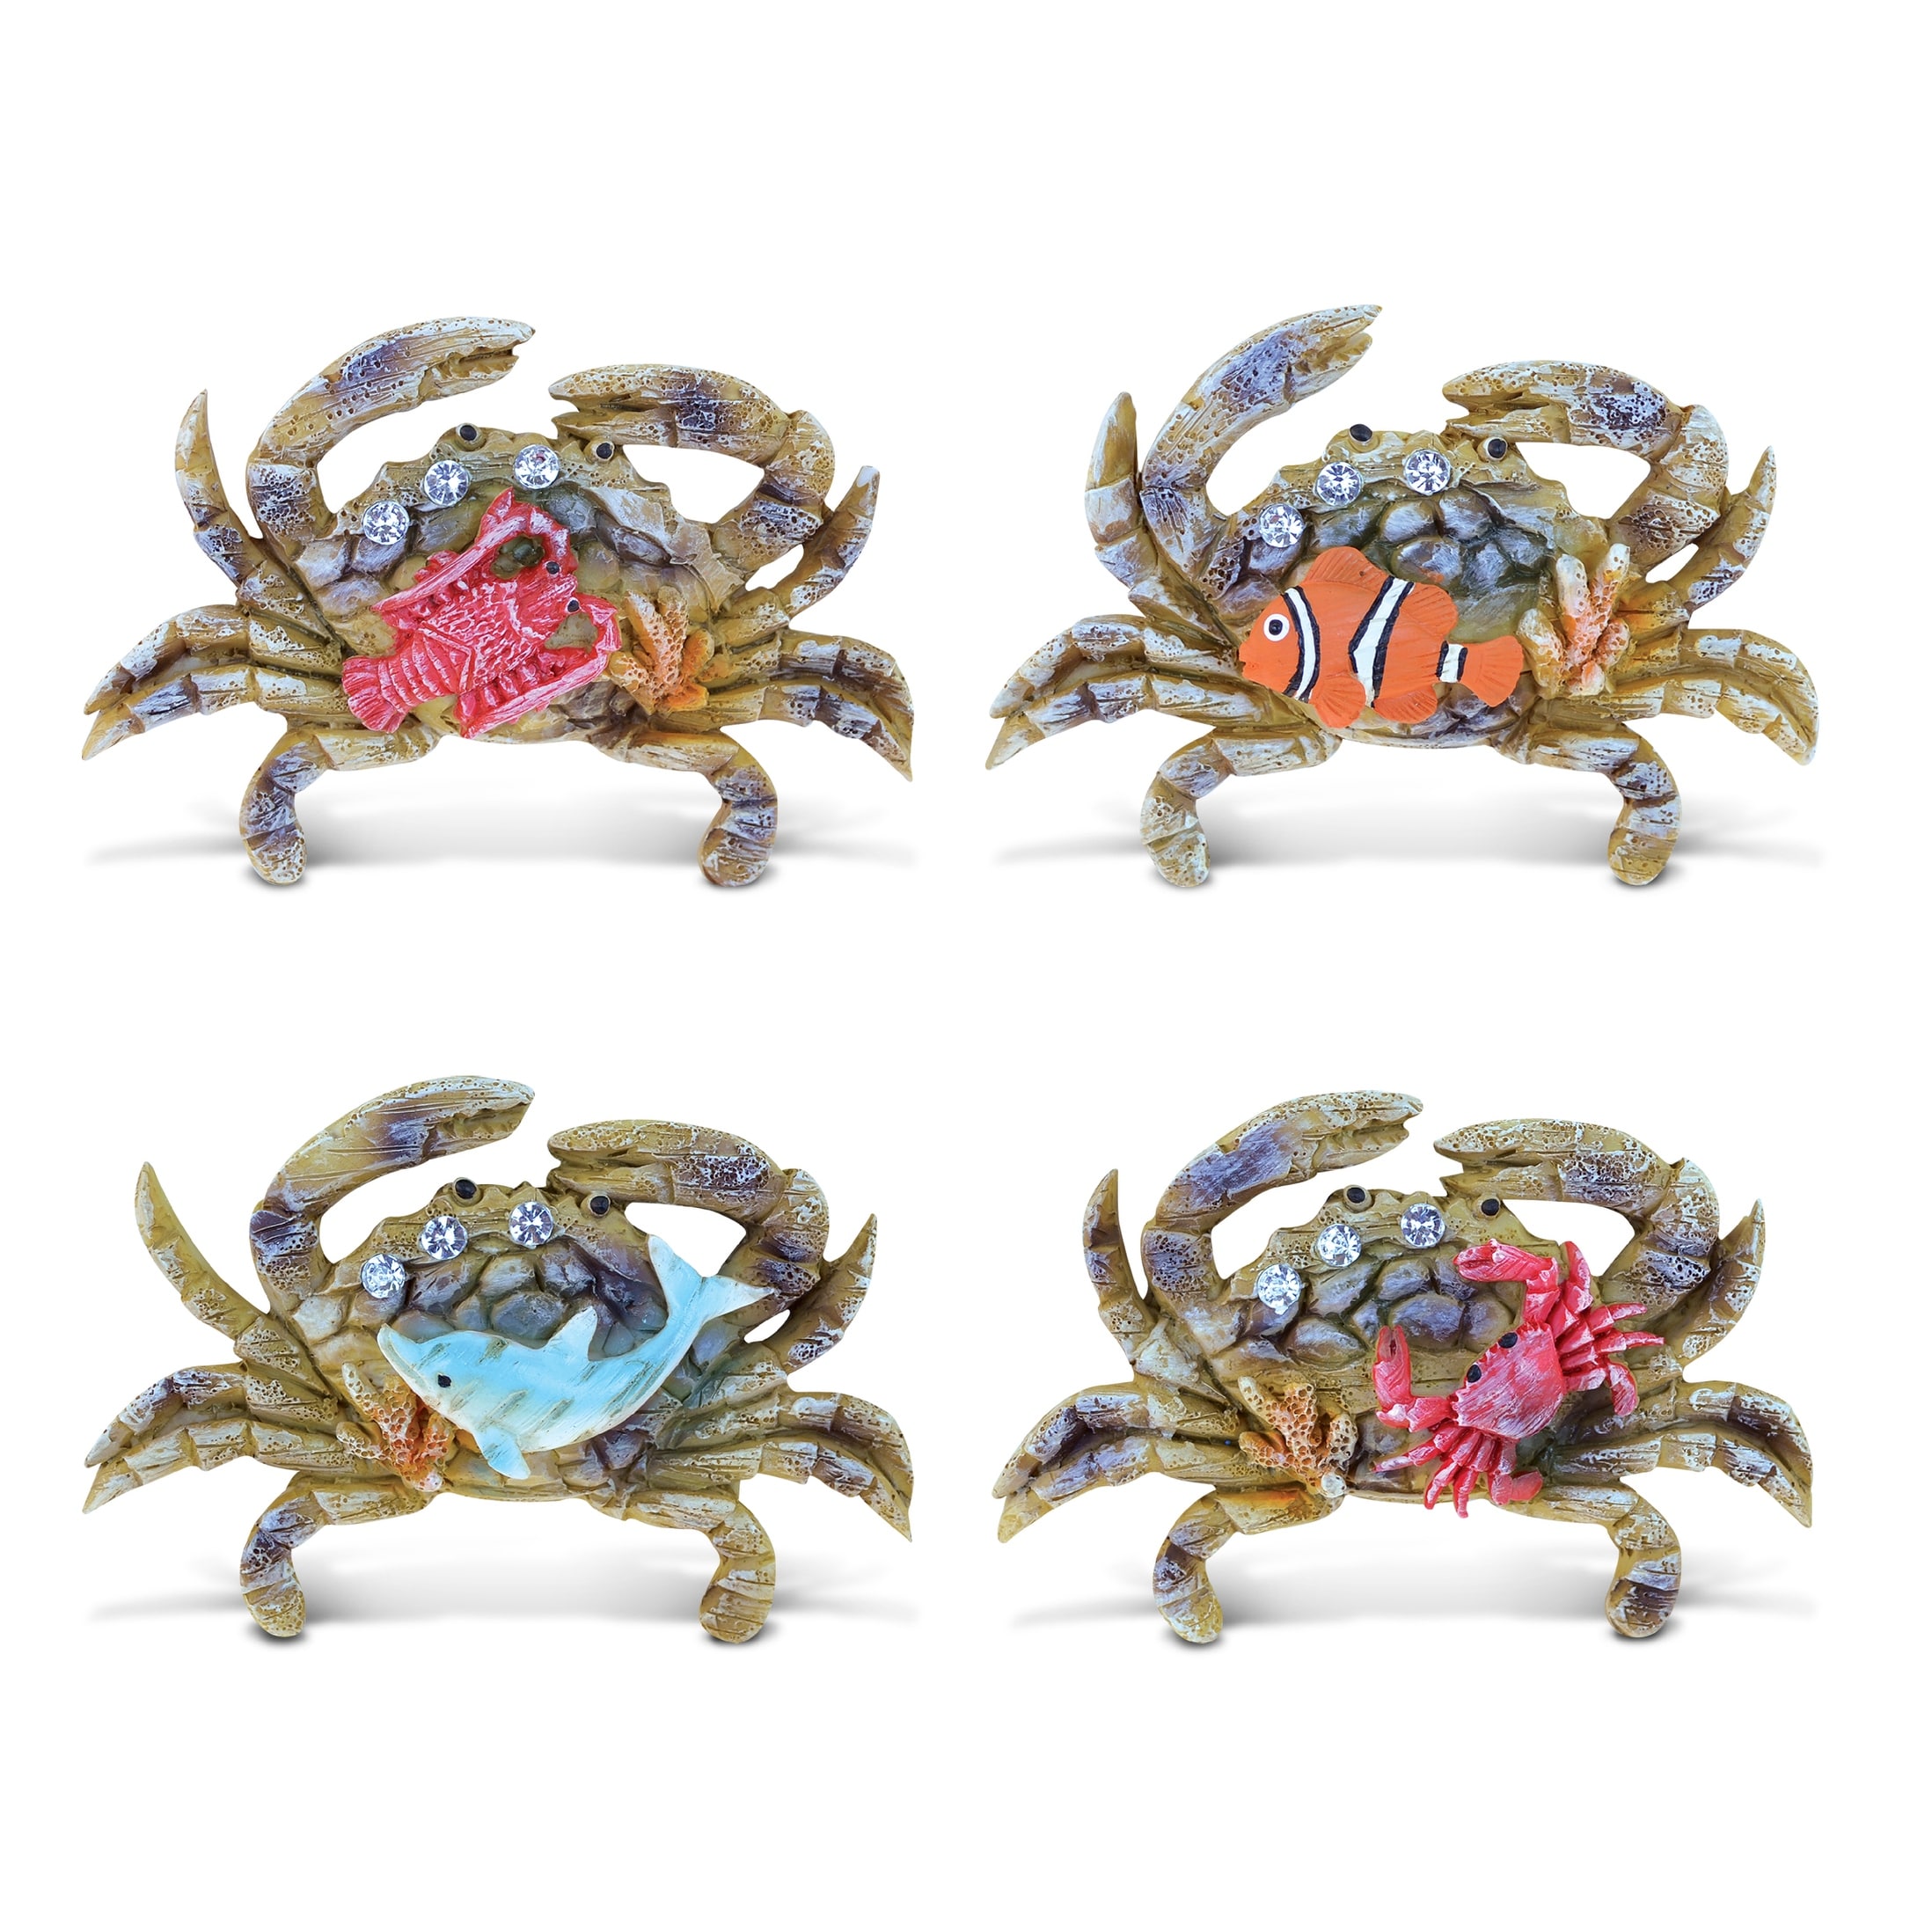 https://ak1.ostkcdn.com/images/products/is/images/direct/caeebc159b3c8d9c8ac6e3d49733190f4ab2be2e/CoTa-Global-Crab-Refrigerator-Rockstone-Magnets-Set-of-4.jpg